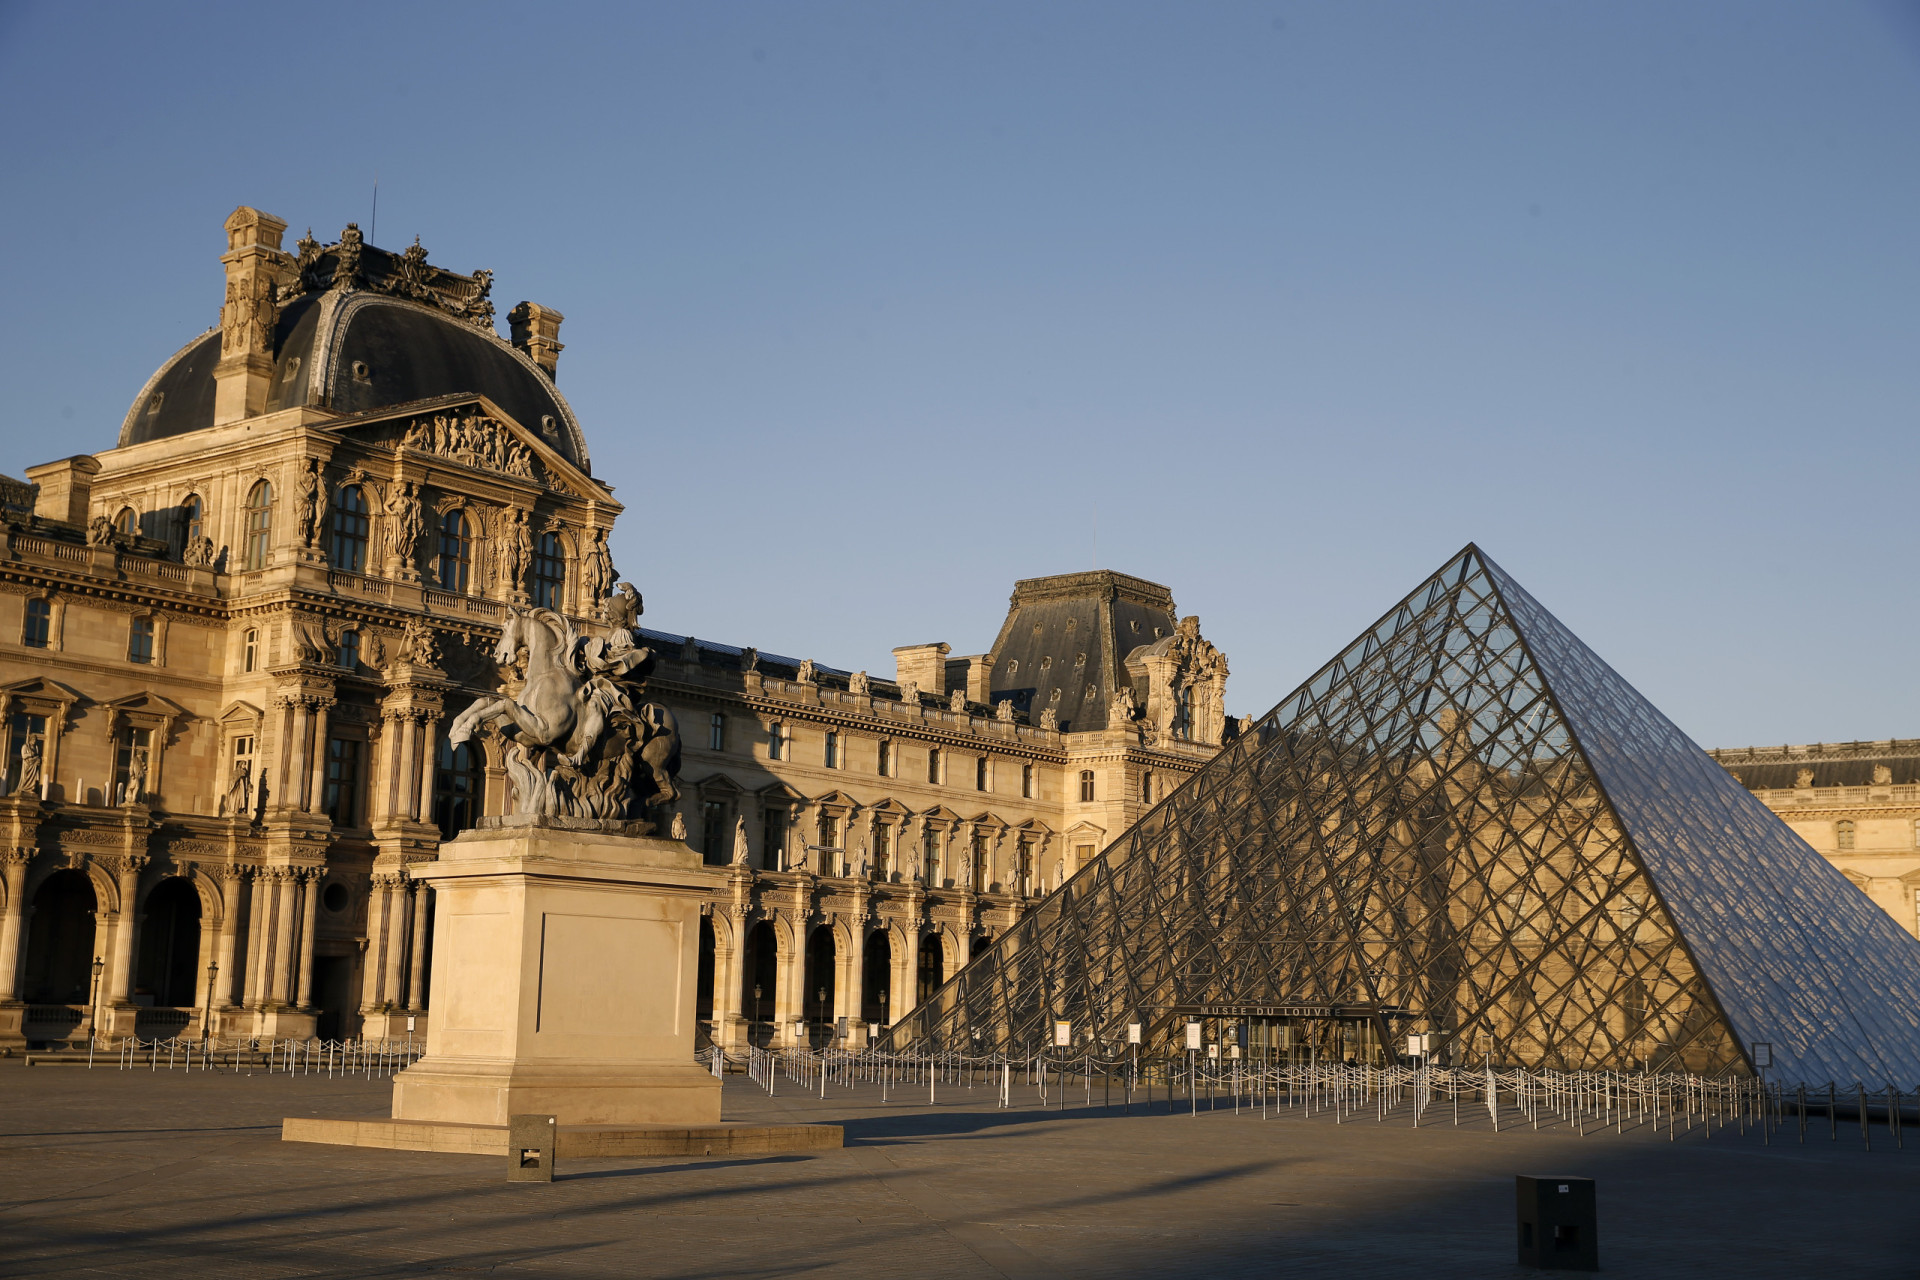 <p>Many of Paris’ tourist attractions have made it a city worth exploring, including the Louvre and the Eiffel Tower.</p><p>You may also like:<a href="https://www.starsinsider.com/n/474572?utm_source=msn.com&utm_medium=display&utm_campaign=referral_description&utm_content=700885en-us"> The most shocking love triangles in world history</a></p>